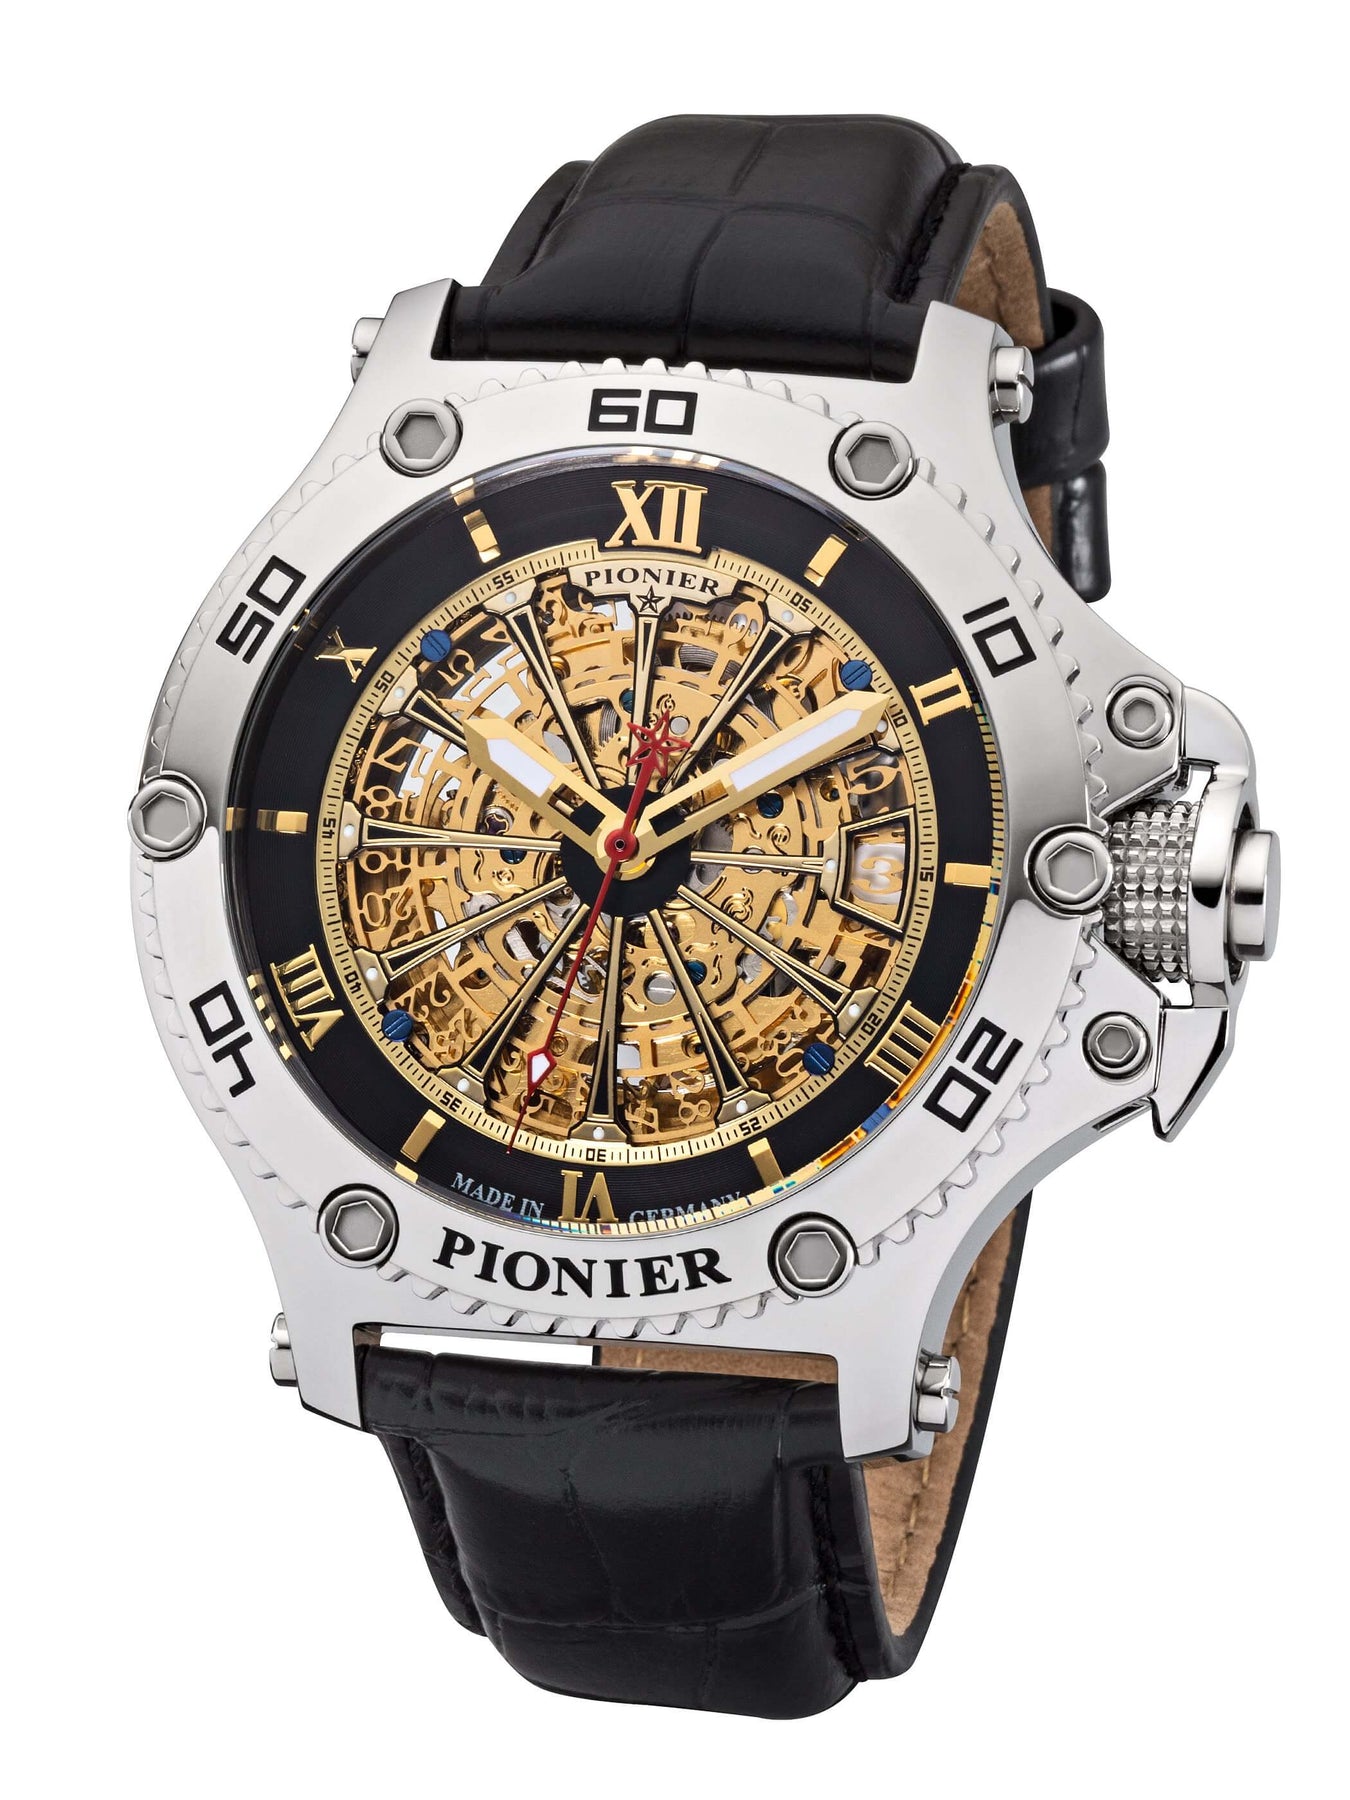 Barcelona Pionier GM-516-2 gold skeleton dial with silver case and black leather band.